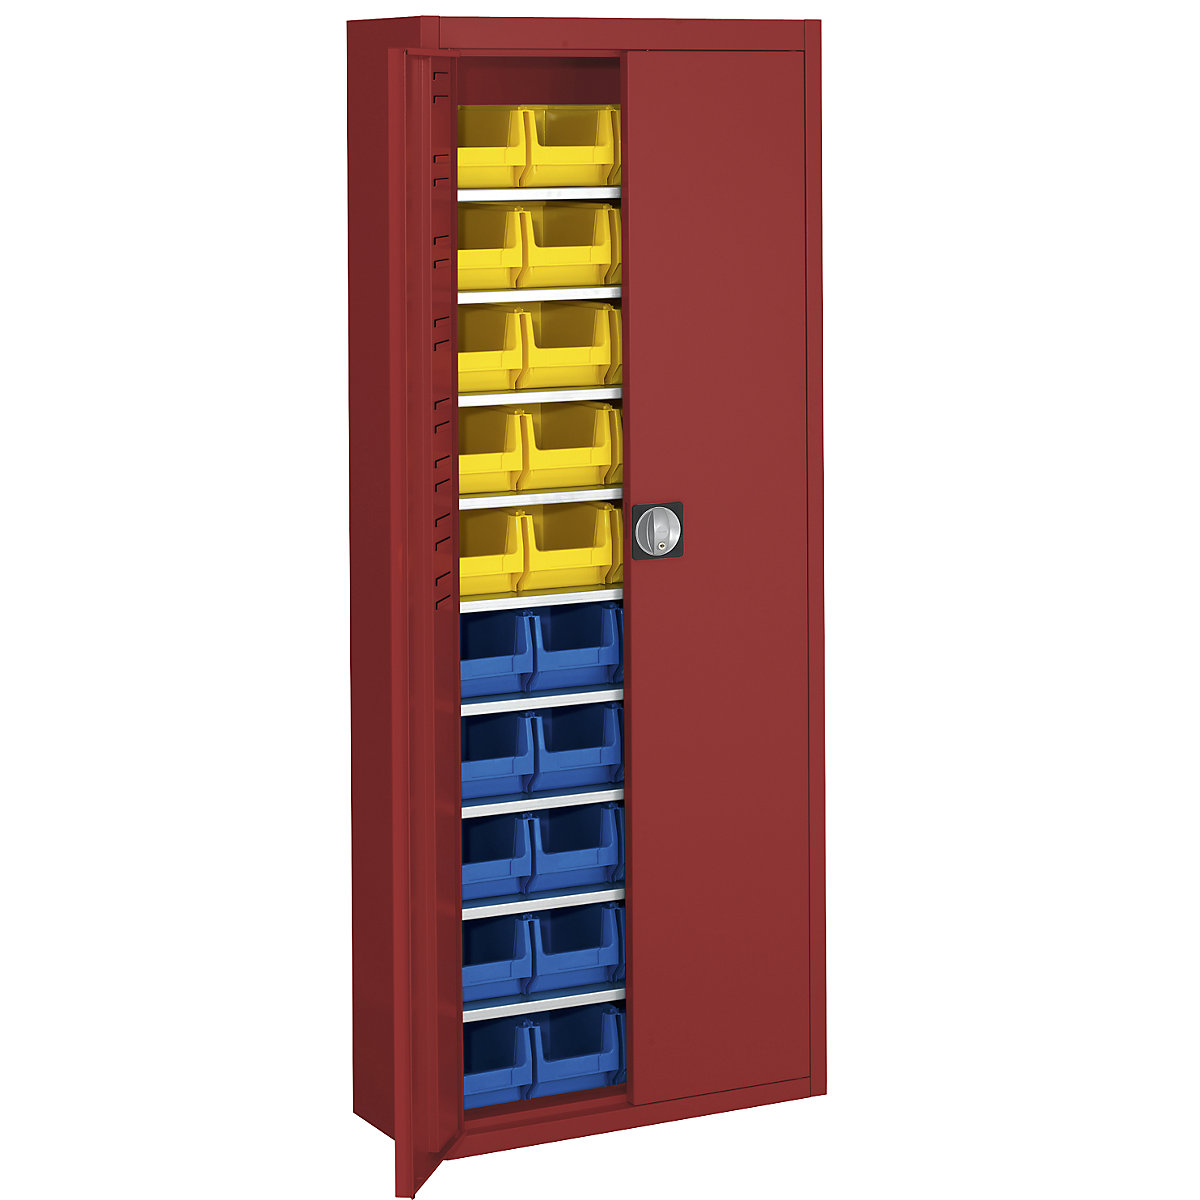 Storage cupboard with open fronted storage bins – mauser, HxWxD 1740 x 680 x 280 mm, single colour, red, 40 bins-5